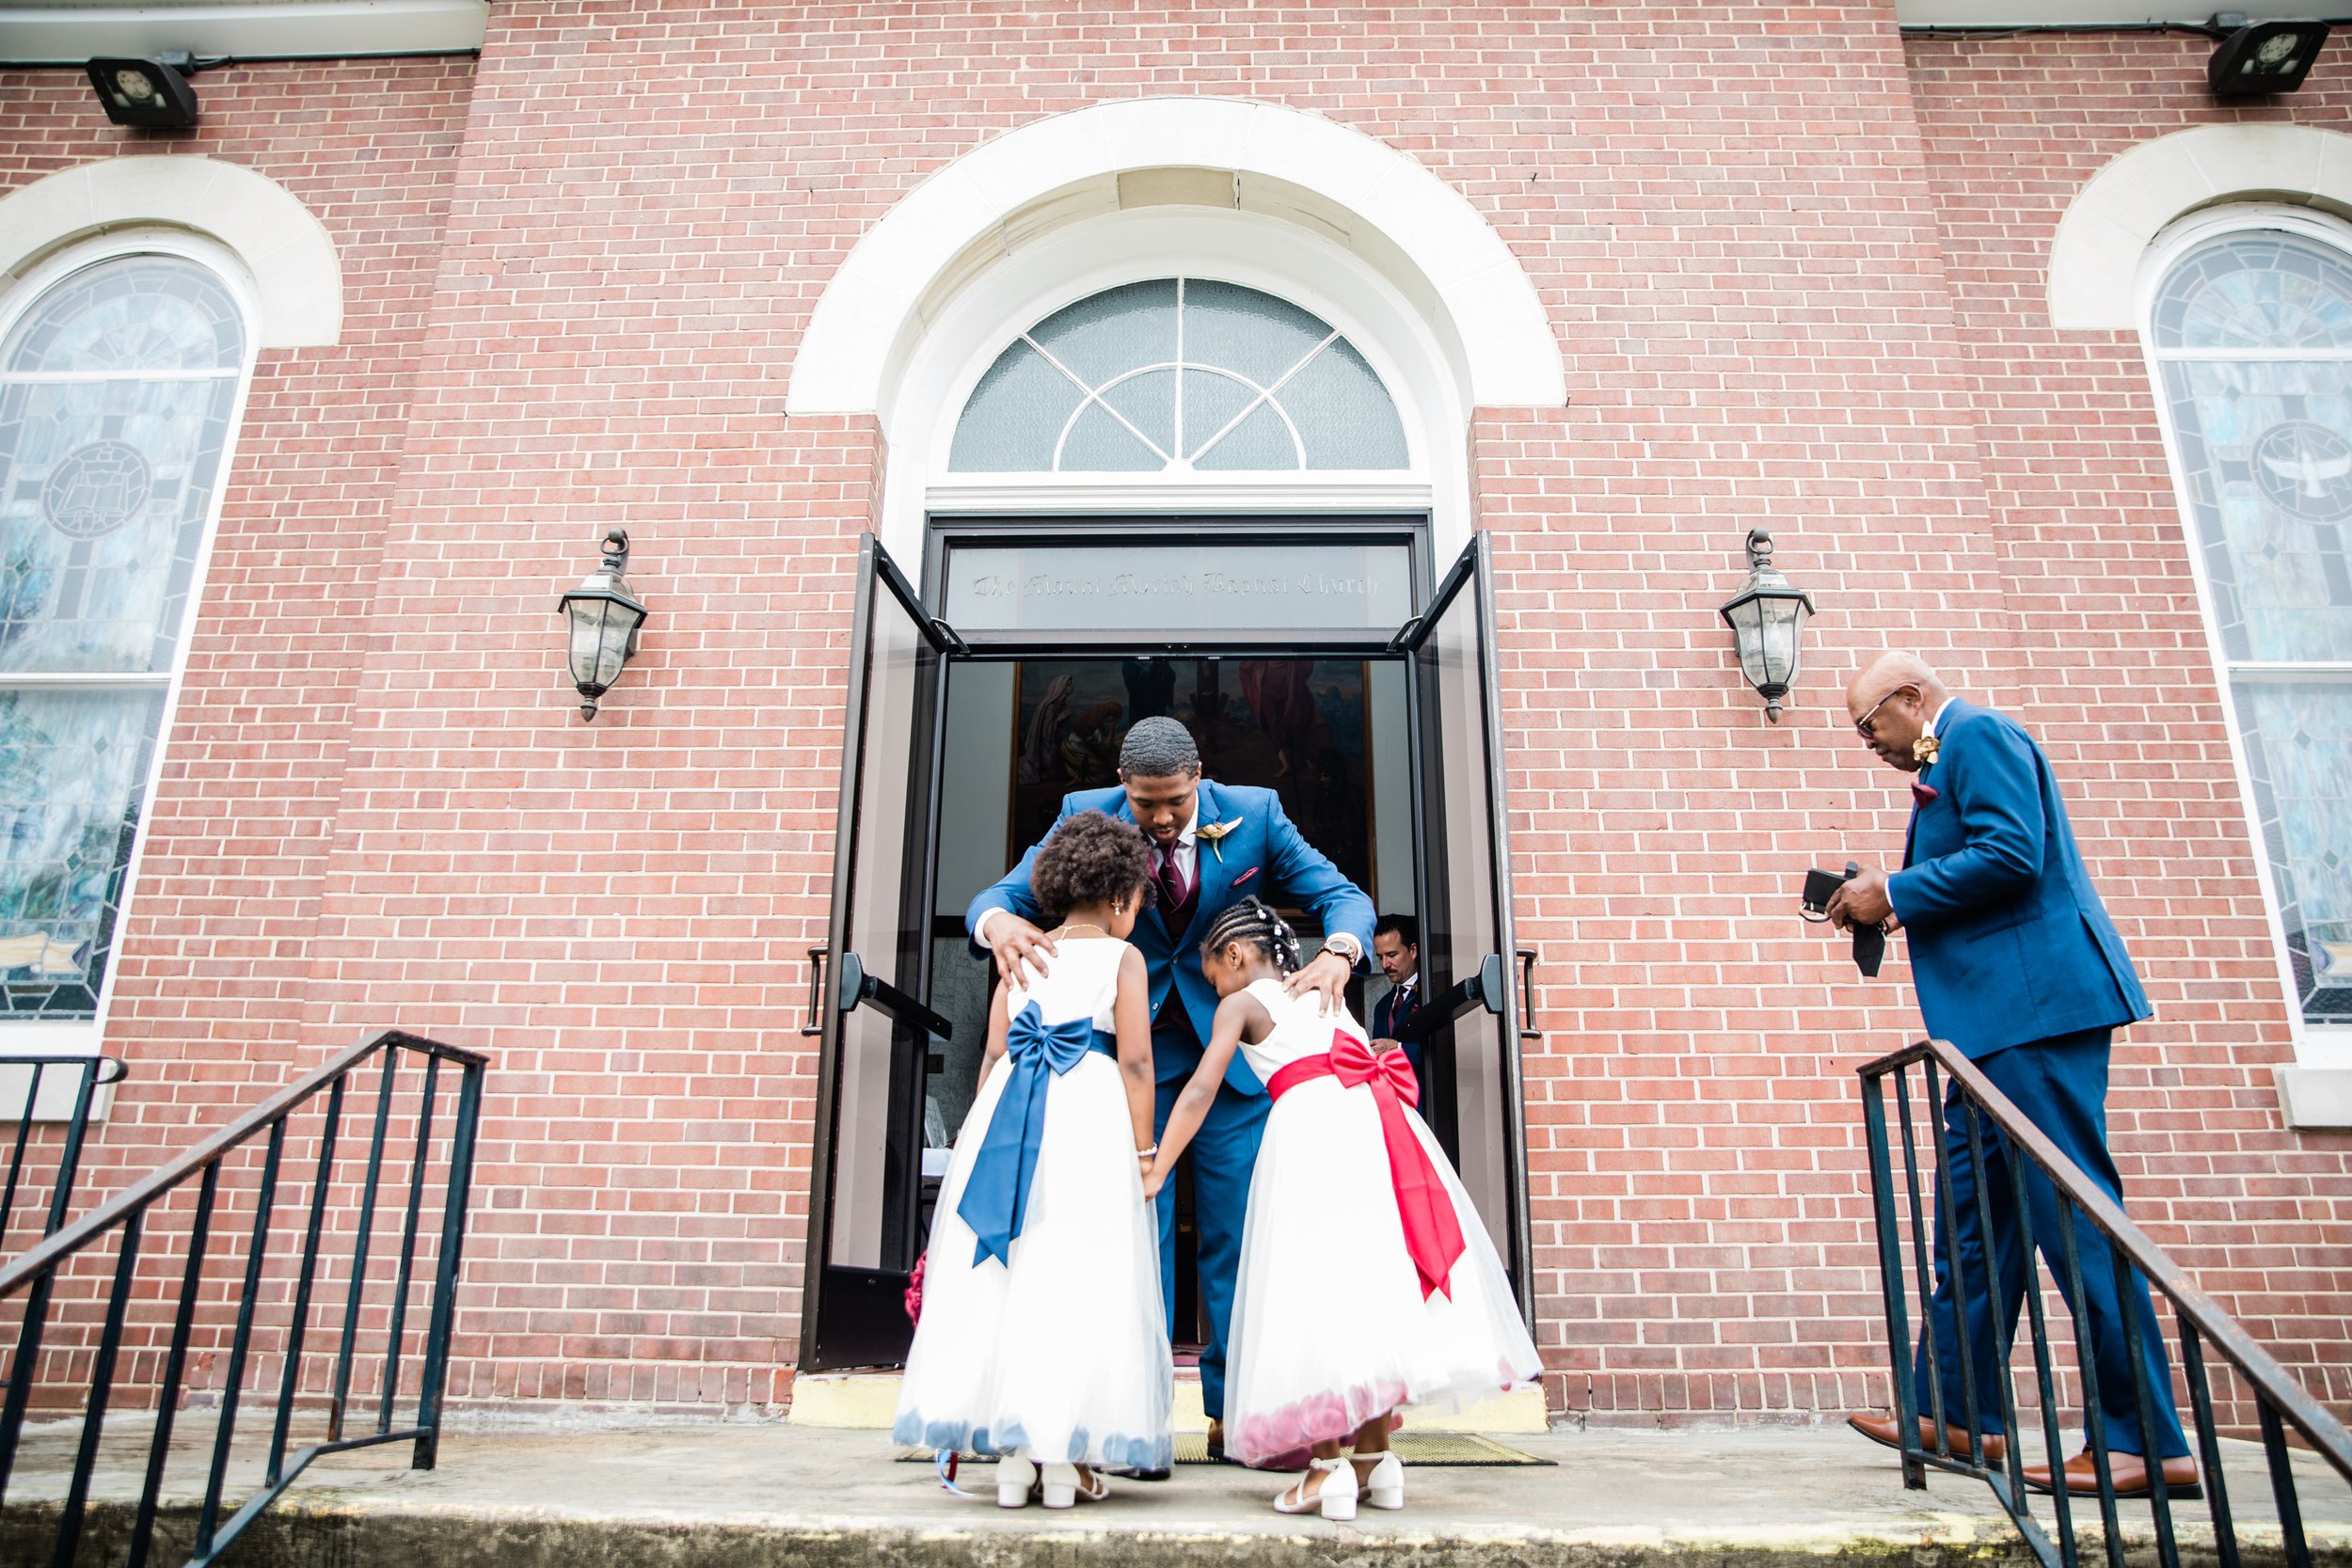 Harry Potter and Star Wars Themed Wedding at Martins West in Baltimore Maryland Shot by Megapixels Media Photography-16.jpg